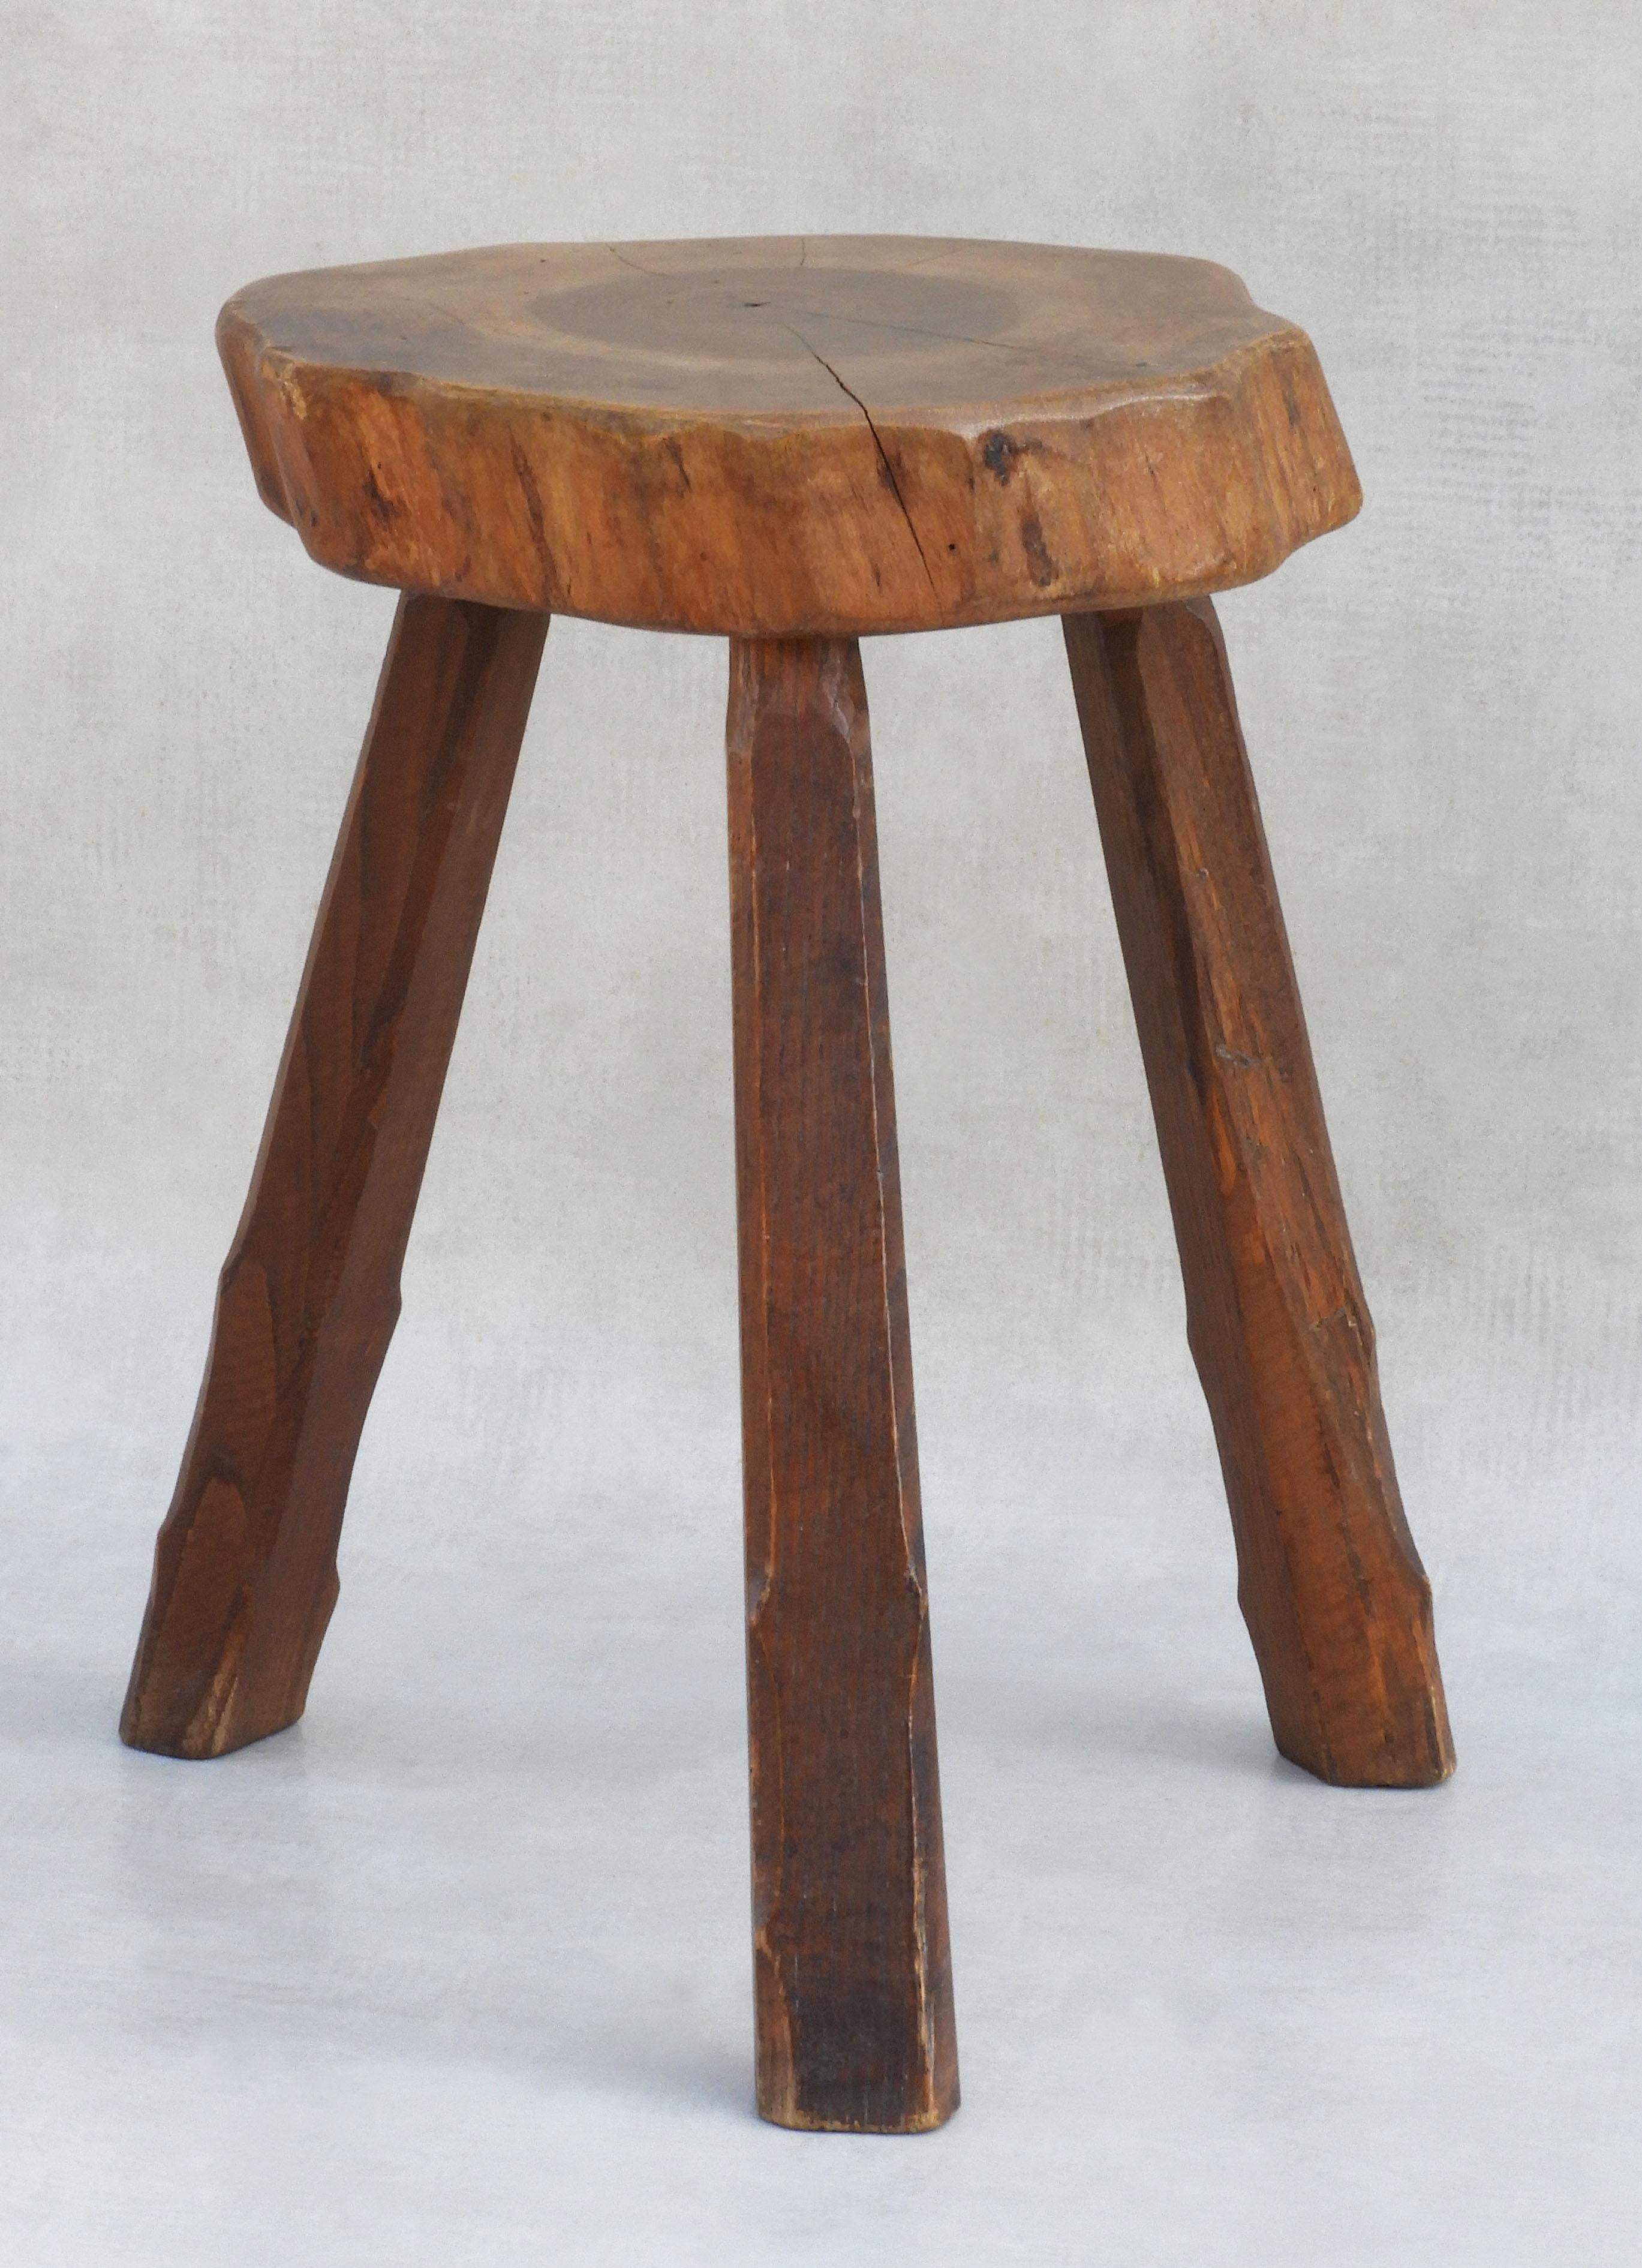 Primitive three-legged tabouret stool handcrafted in France, circa 1950. Well made, solid and sound with no hardware. Live edge, good grain, great patina. A really nice example of mid-century handcrafted French 'Arte Populaire' in great vintage